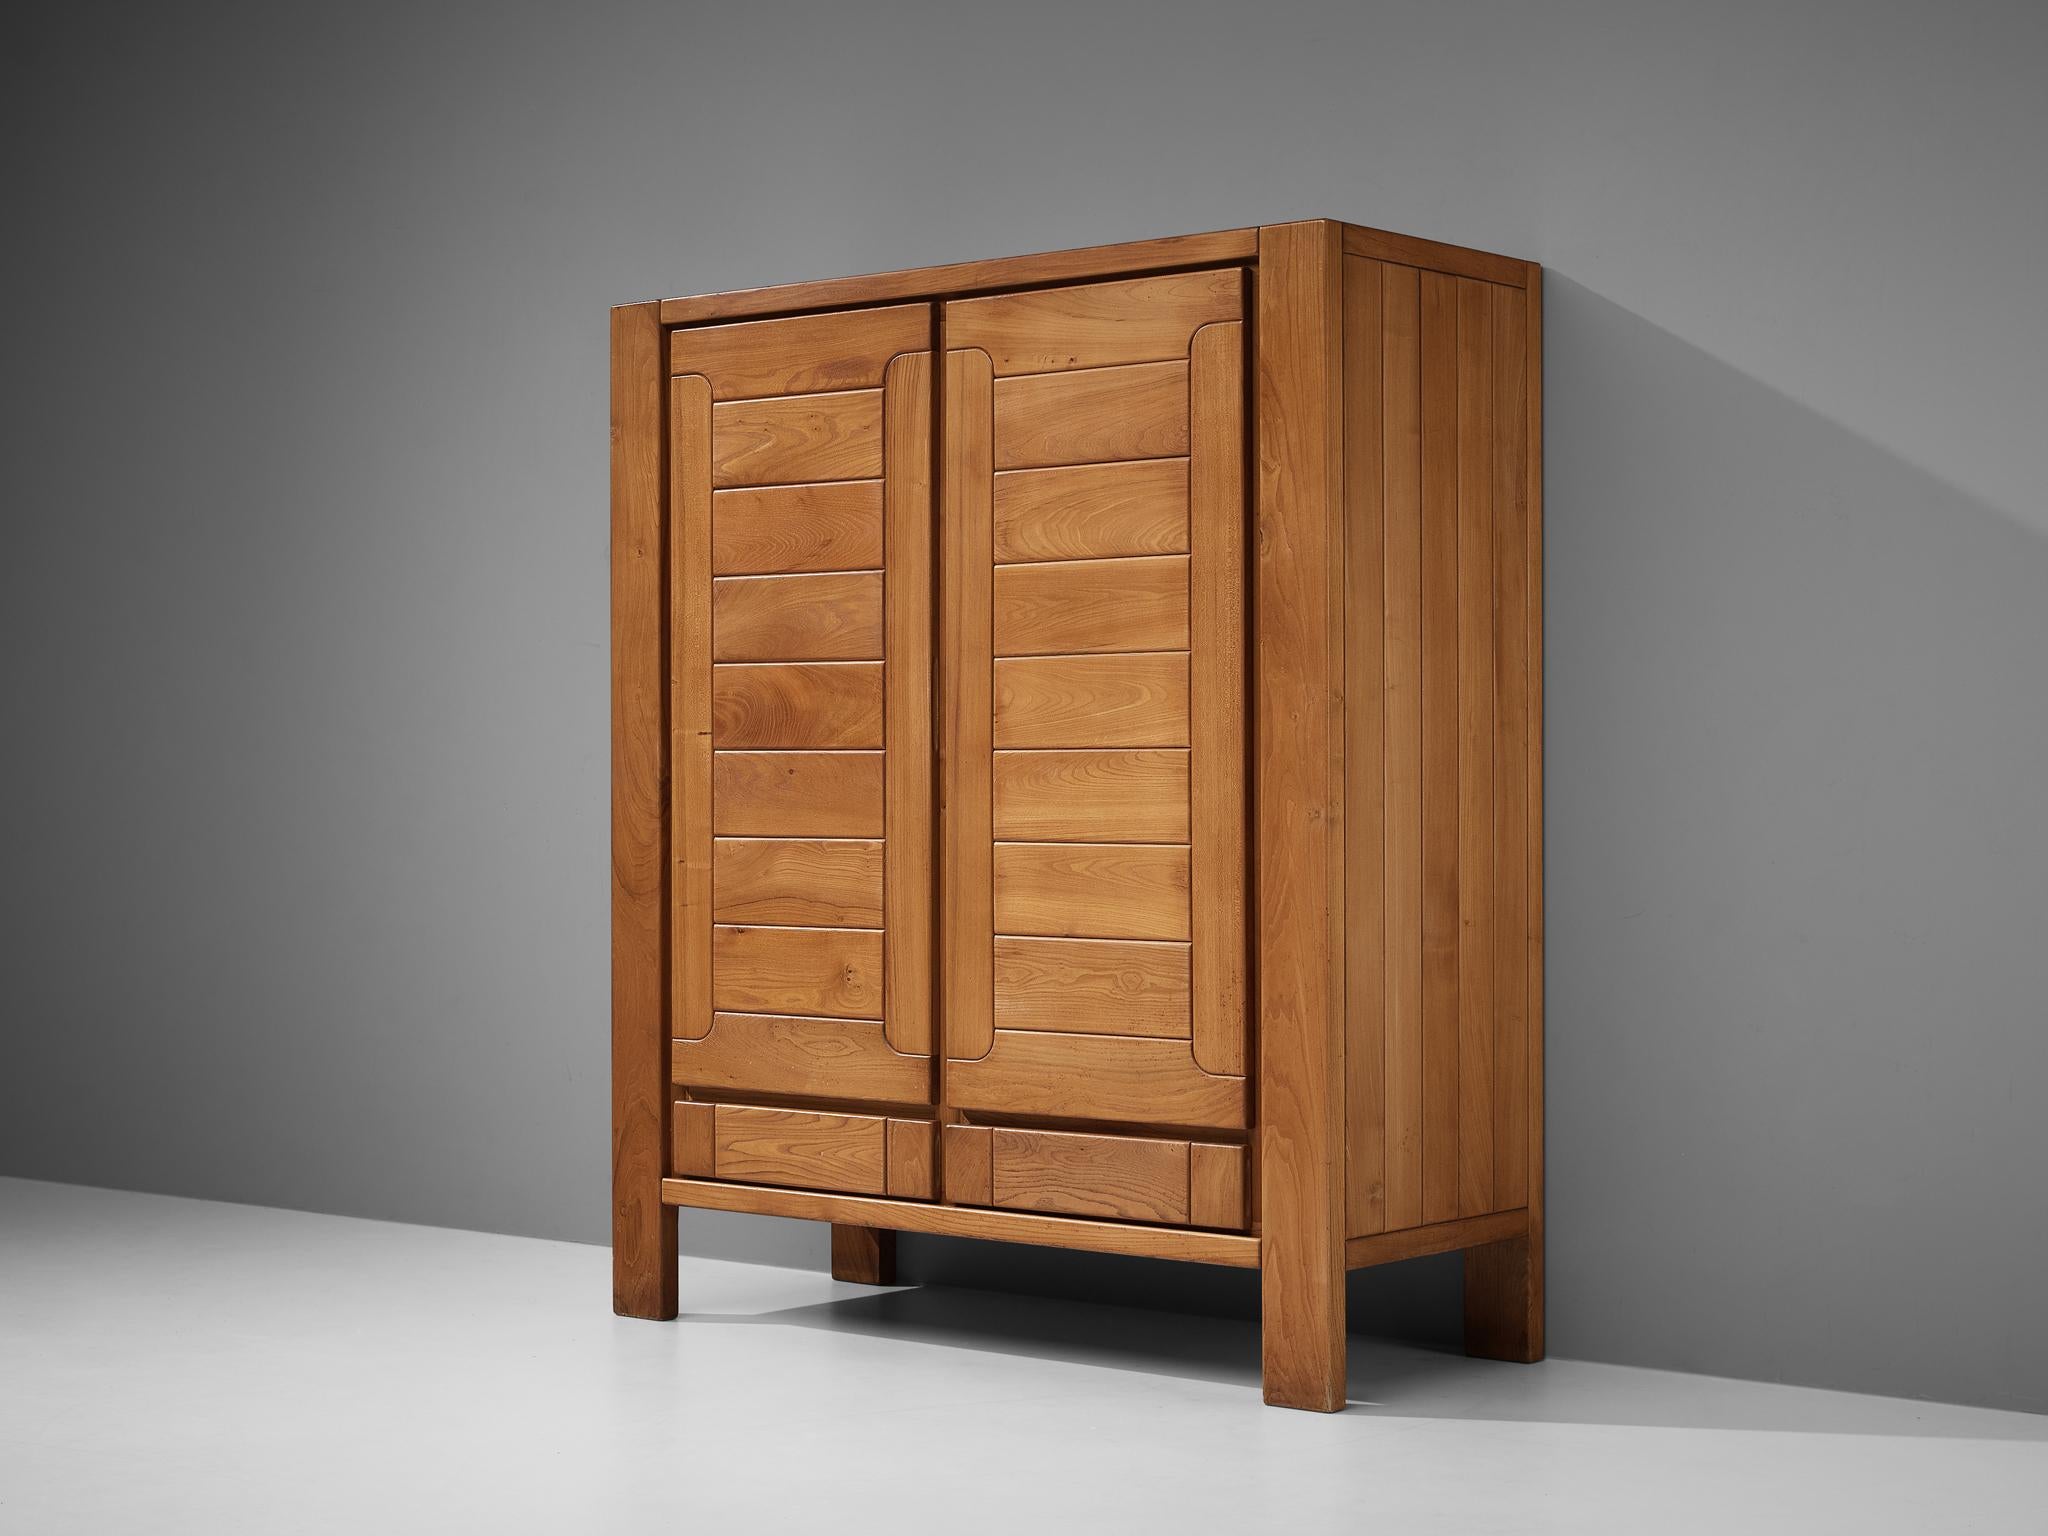 Maison Regain, wardrobe, elm, France, 1960s

This wardrobe with two doors features the distinct look of Maison Regain. The elmwood is structured by geometric fields. Two drawers at the bottom and a cloths rack above, provide great storage